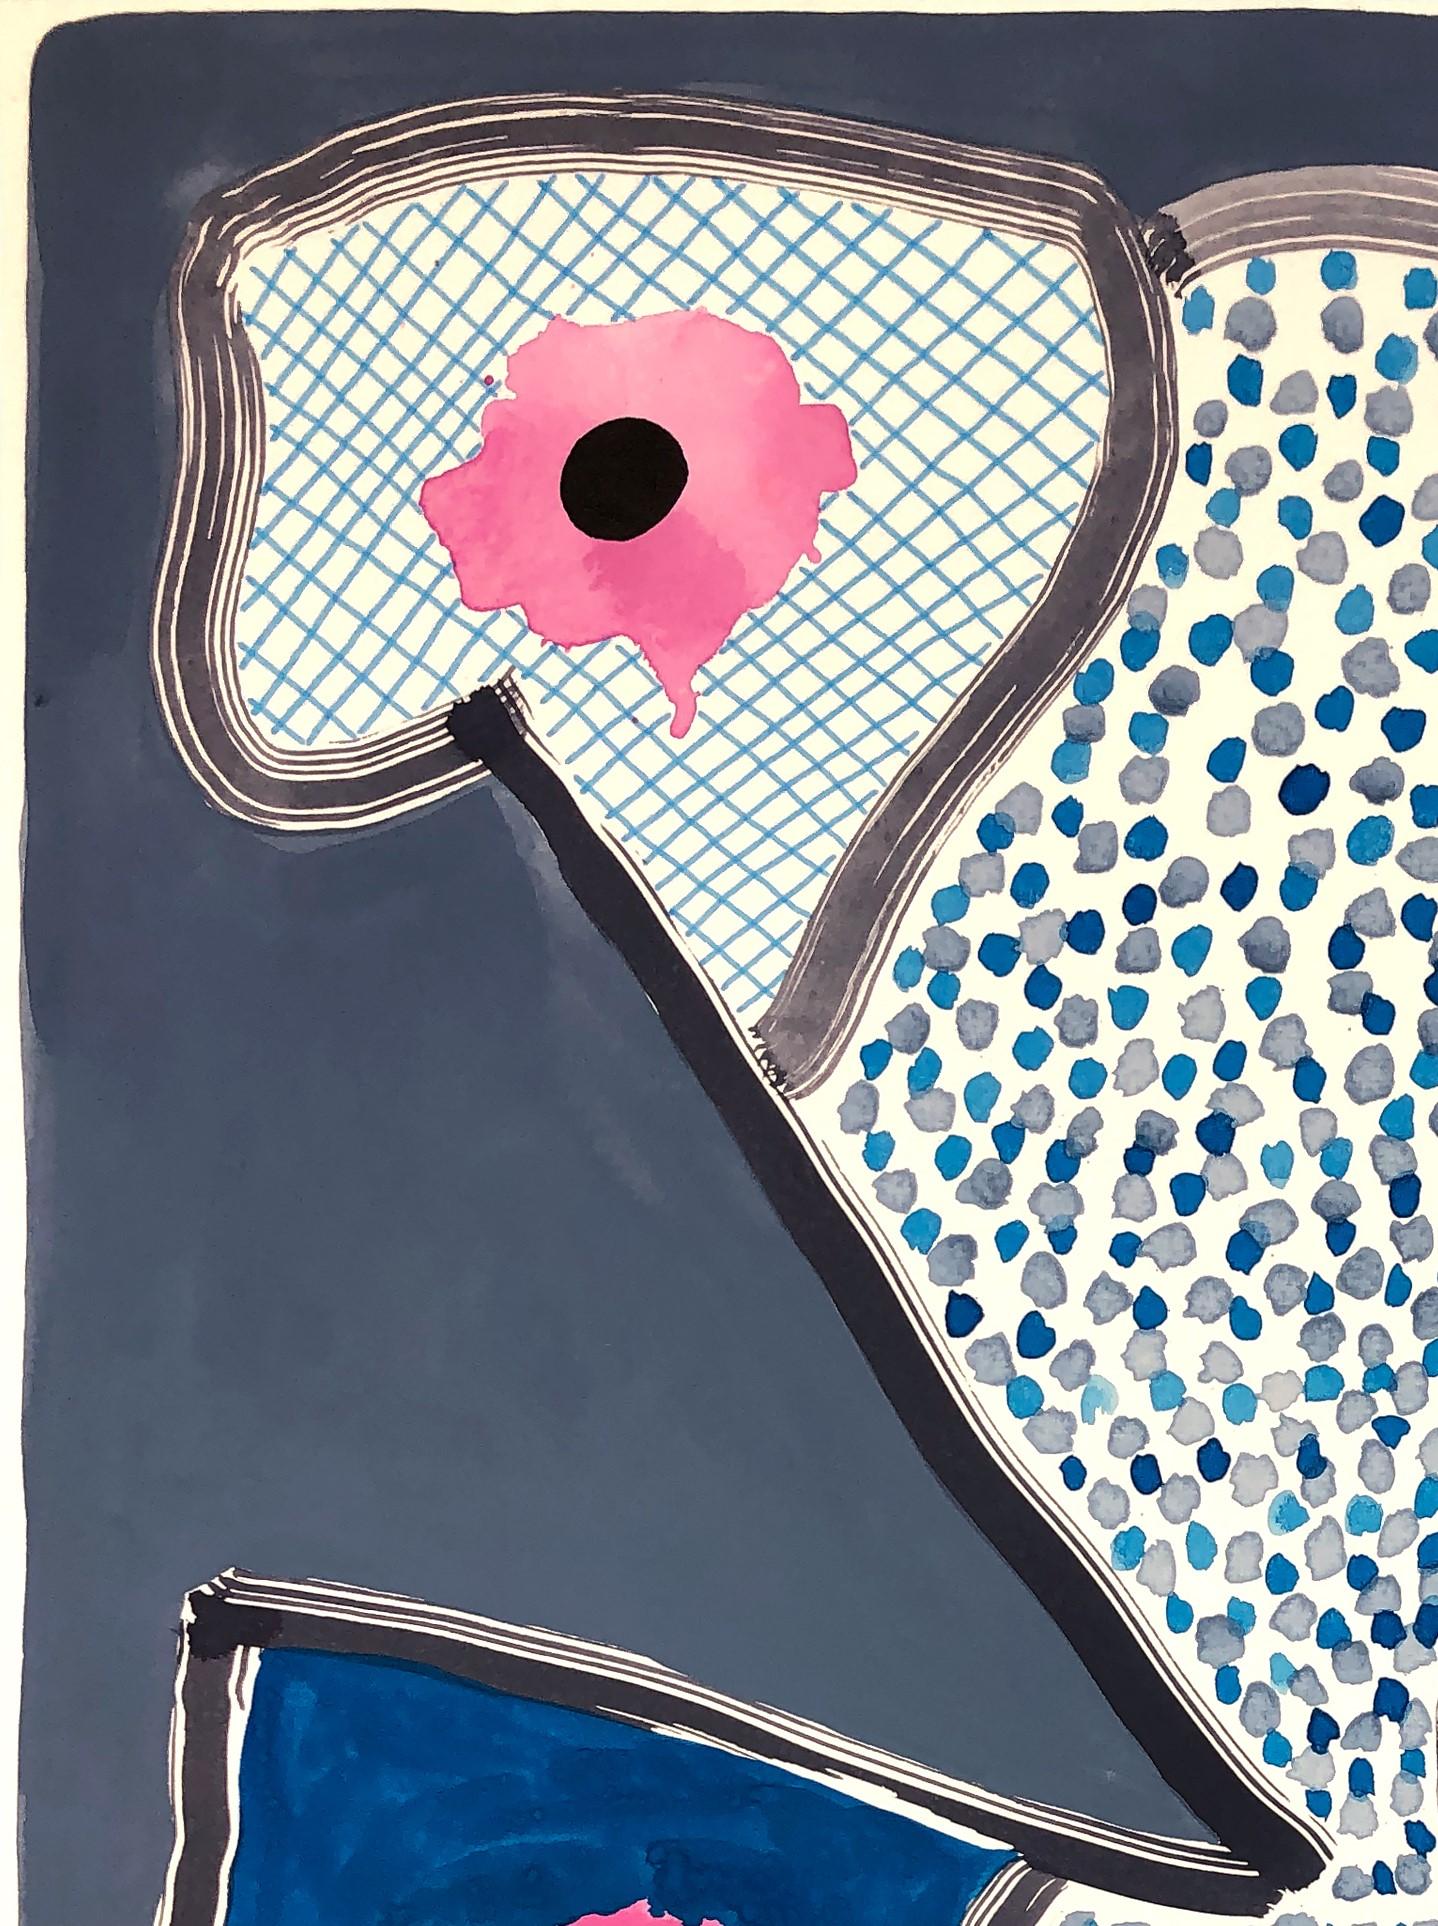 Contemporary abstract geometric colorful patterned work on paper by Texas-based artist Max Manning. The work features organic and  geometric shapes in pinks, blues, grays, black, and white. Signed by the artist on the back of the piece.

Artist